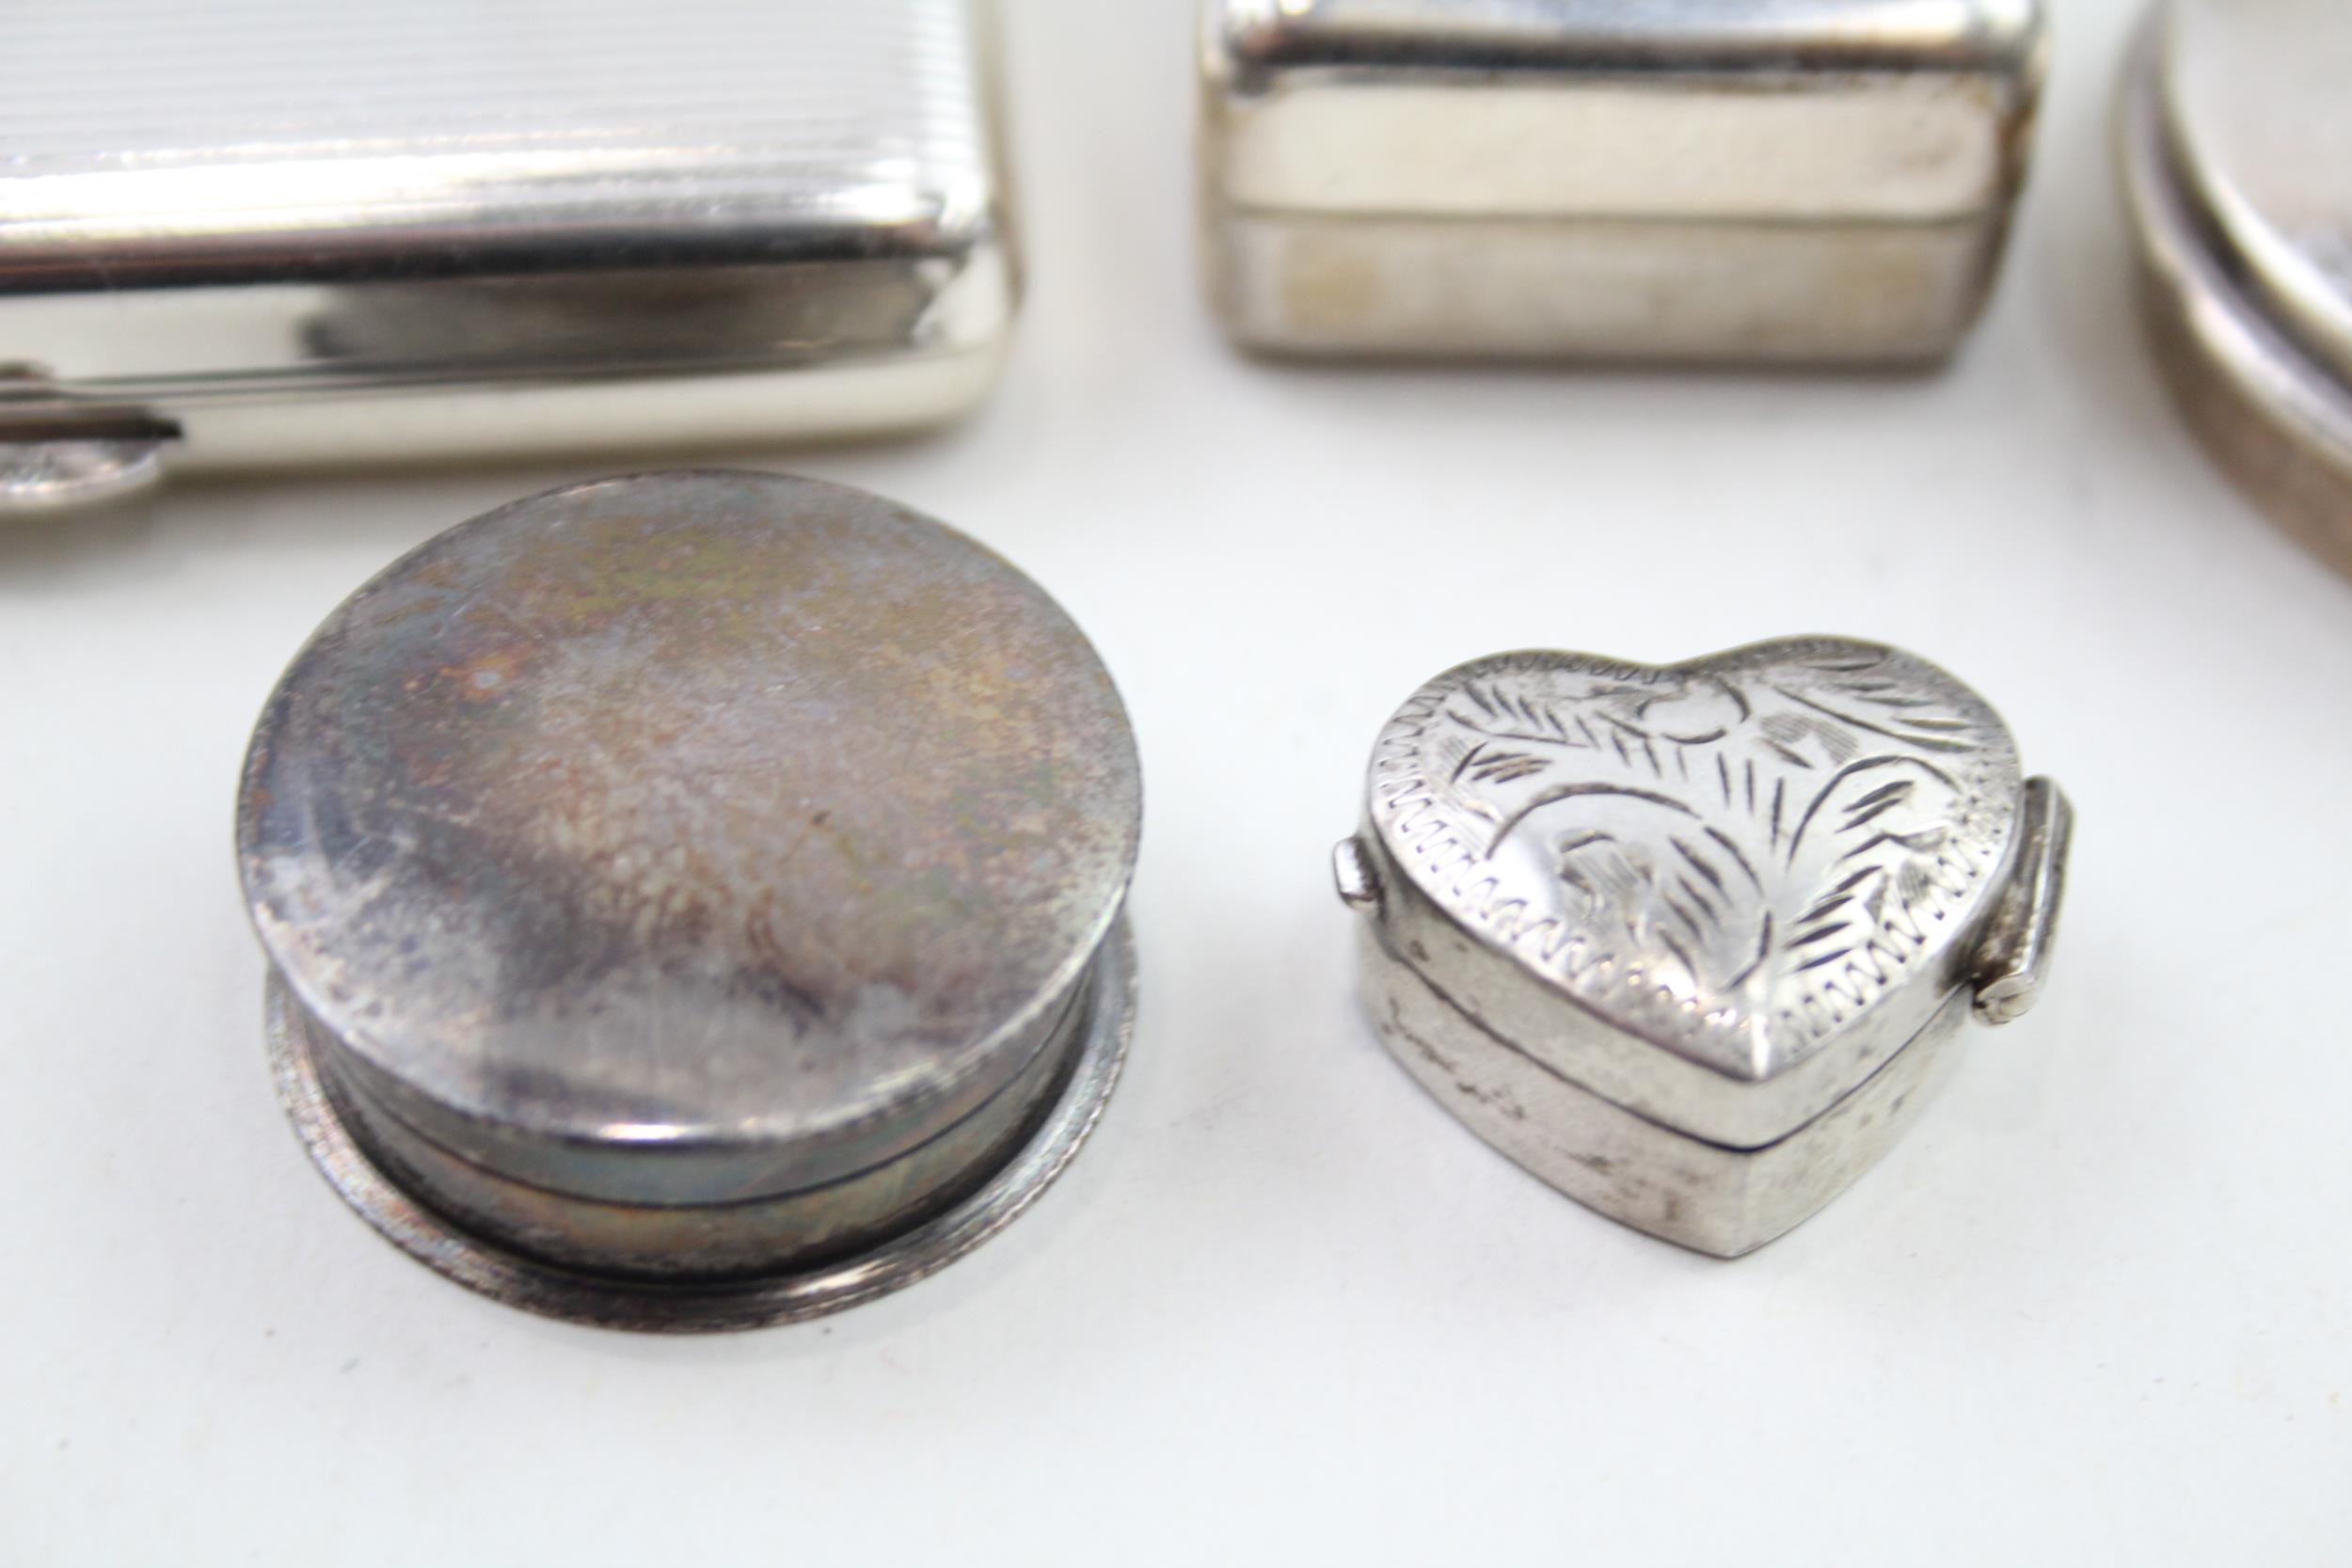 5 x Antique / Vintage Hallmarked .925 STERLING SILVER Pill / Trinket Boxes (90g) - In antique / - Image 4 of 5